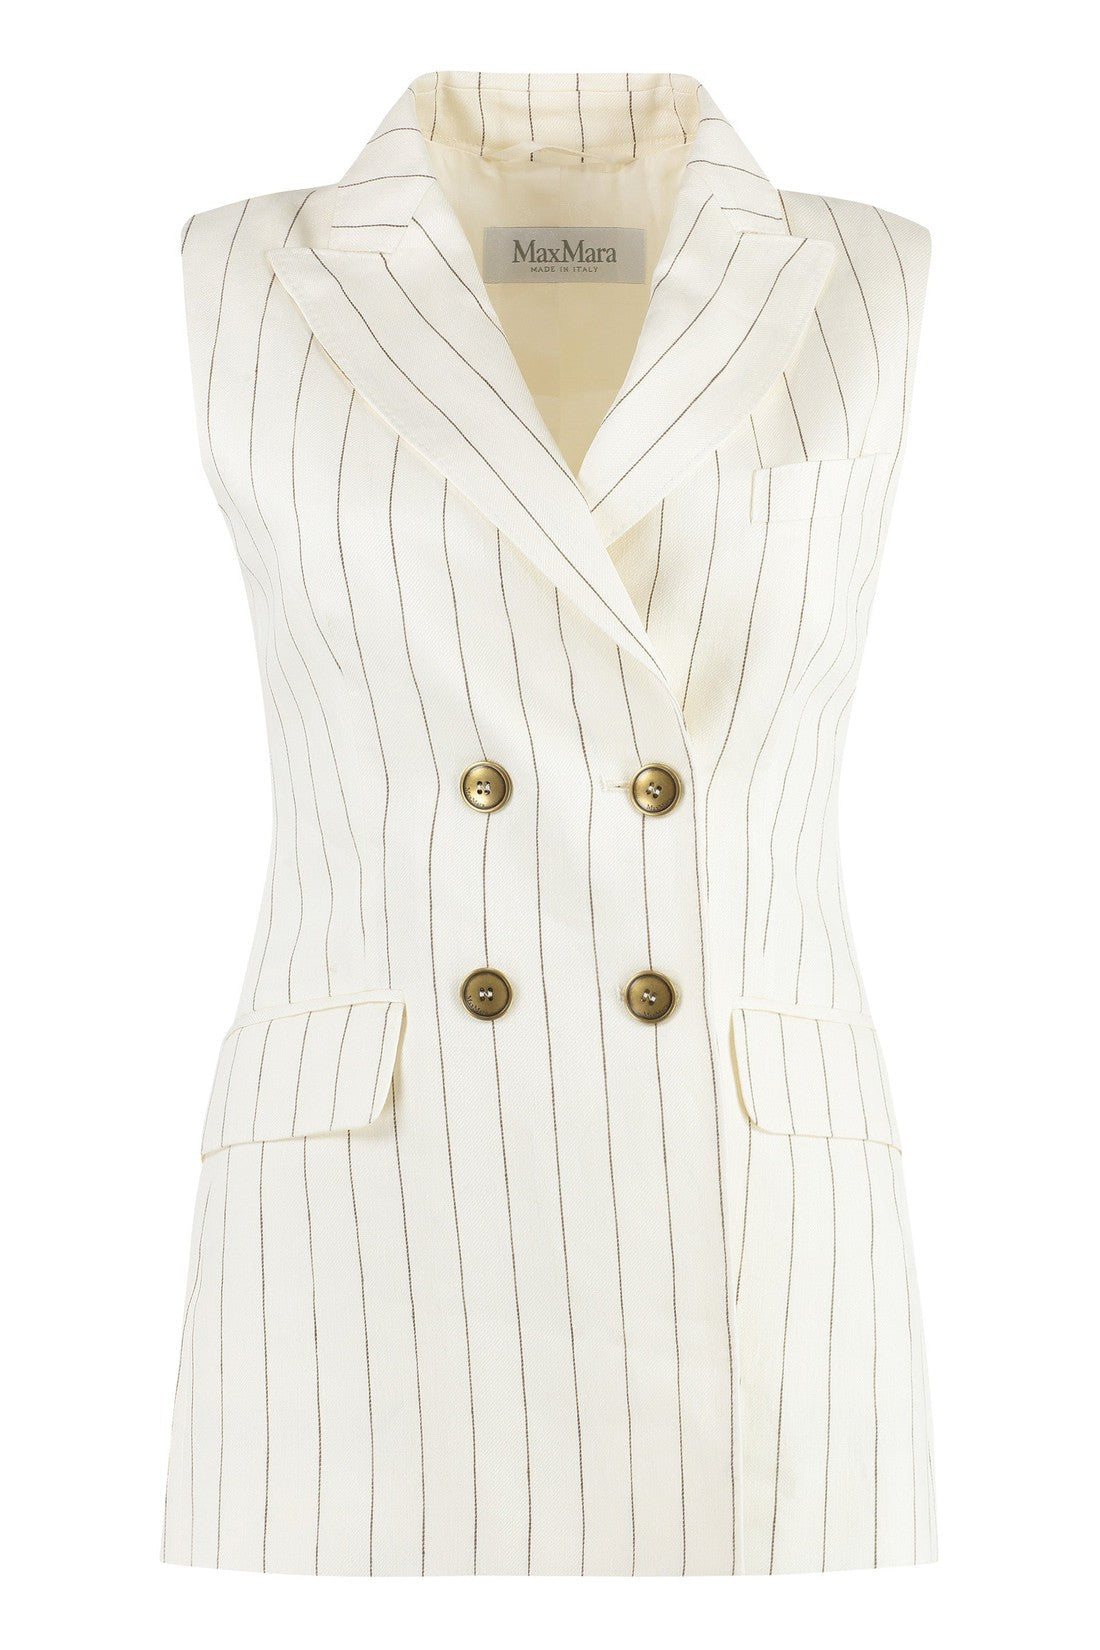 Max Mara-OUTLET-SALE-Quebec double-breasted waistcoat-ARCHIVIST